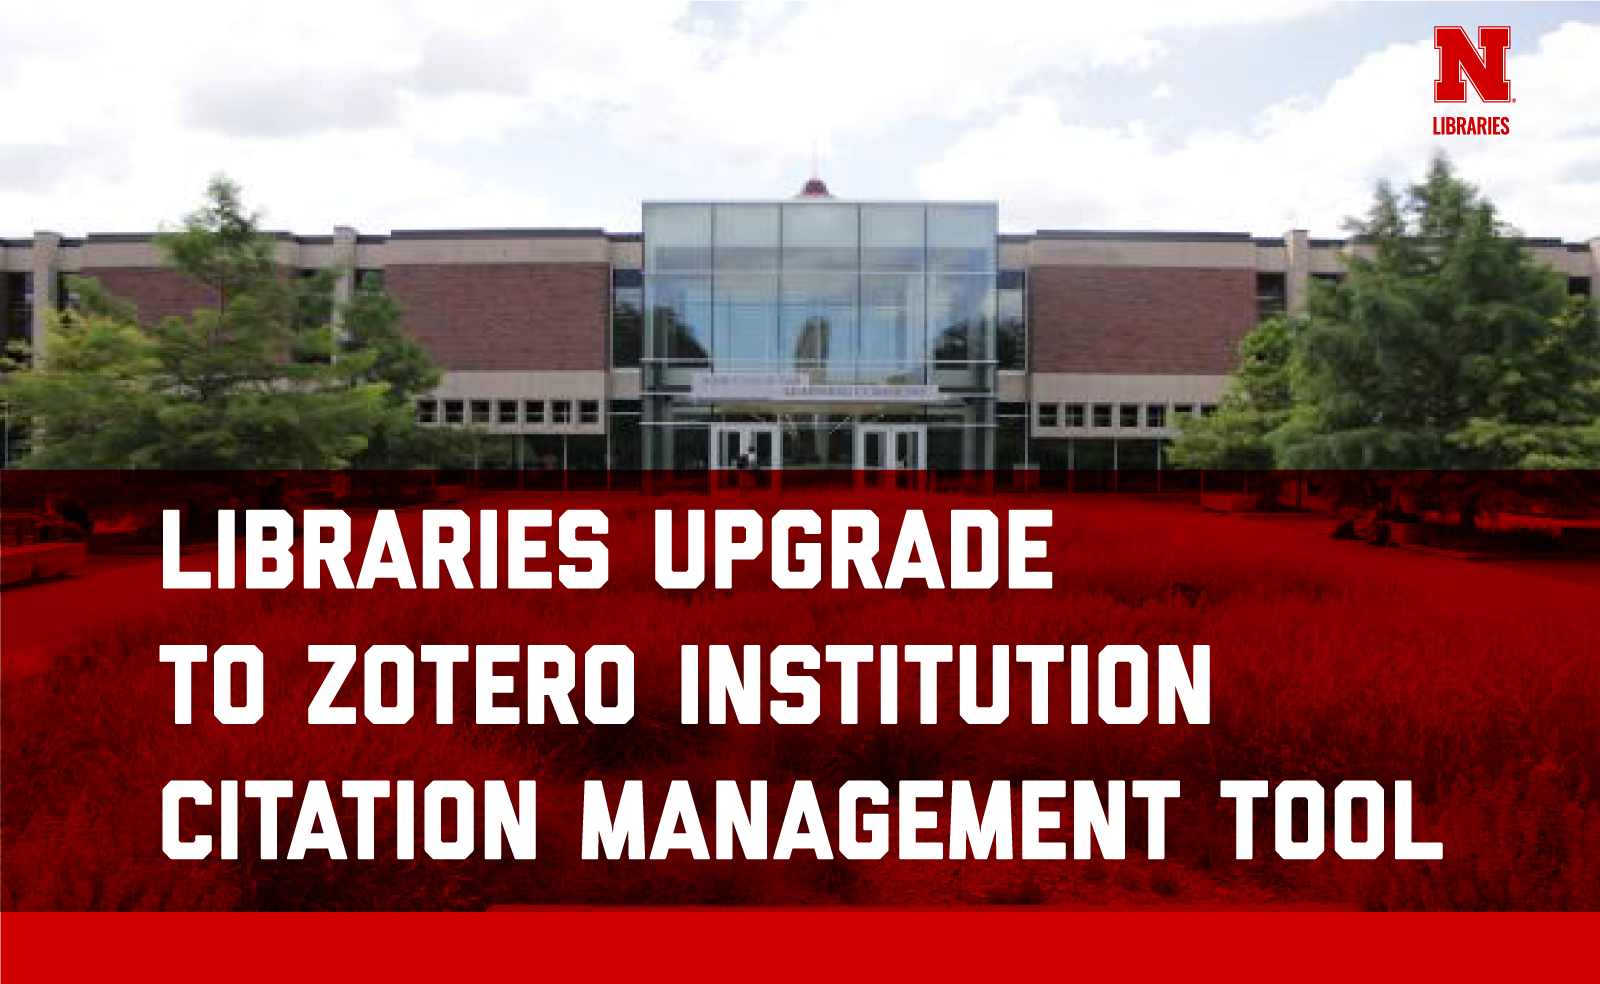 University Libraries is providing an institutional storage license for Zotero, a powerful reference management system.